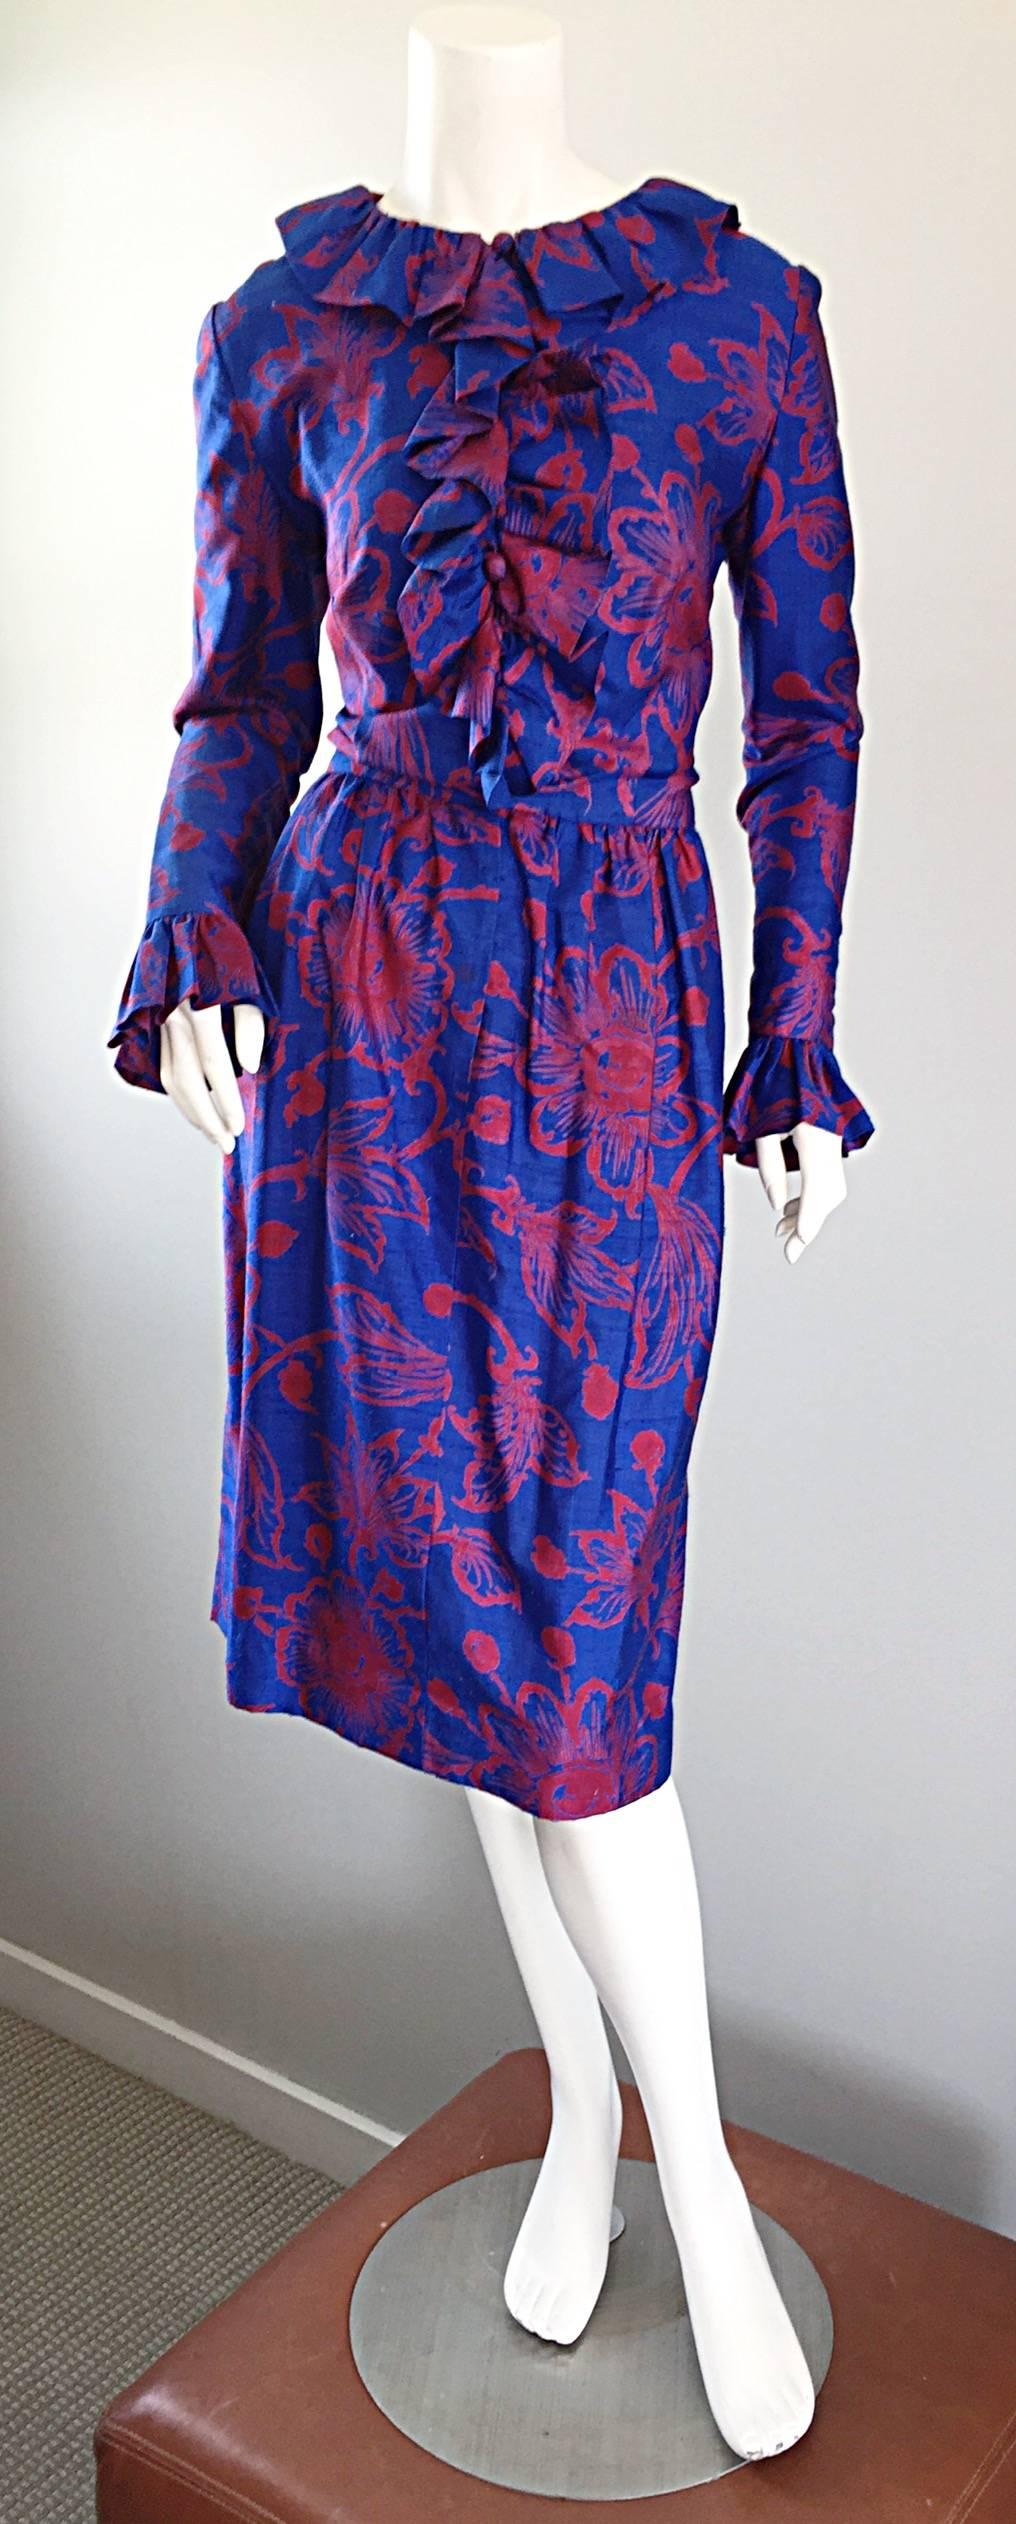 I absolutely LOVE this label! Yen Yen of Malaya was a. Fashion house based in Malaysia in the 1960s. I have only run across a handful of their pieces, and this is definitely one of my favorites!
Vibrant blue and red silk with an incredible abstract